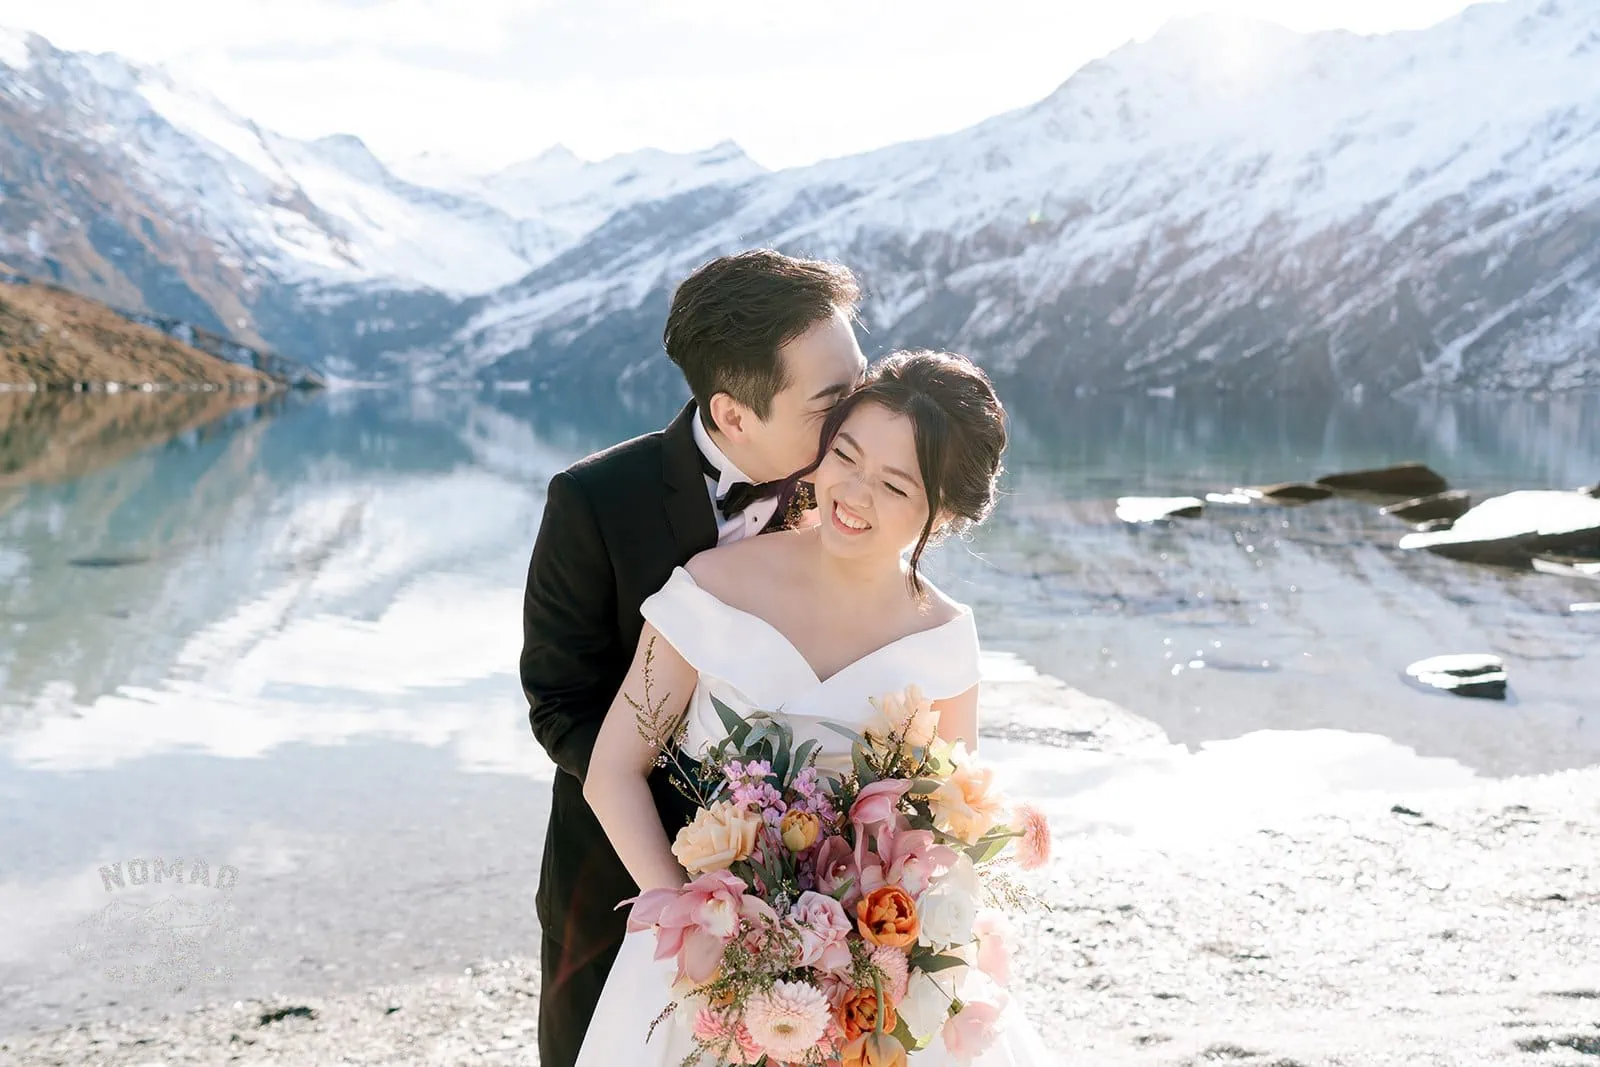 Queenstown New Zealand Elopement Wedding Photographer - Bo and Junyi, a bride and groom, share an intimate embrace during their Heli Pre Wedding Shoot with 4 Landings by a lake in New Zealand.